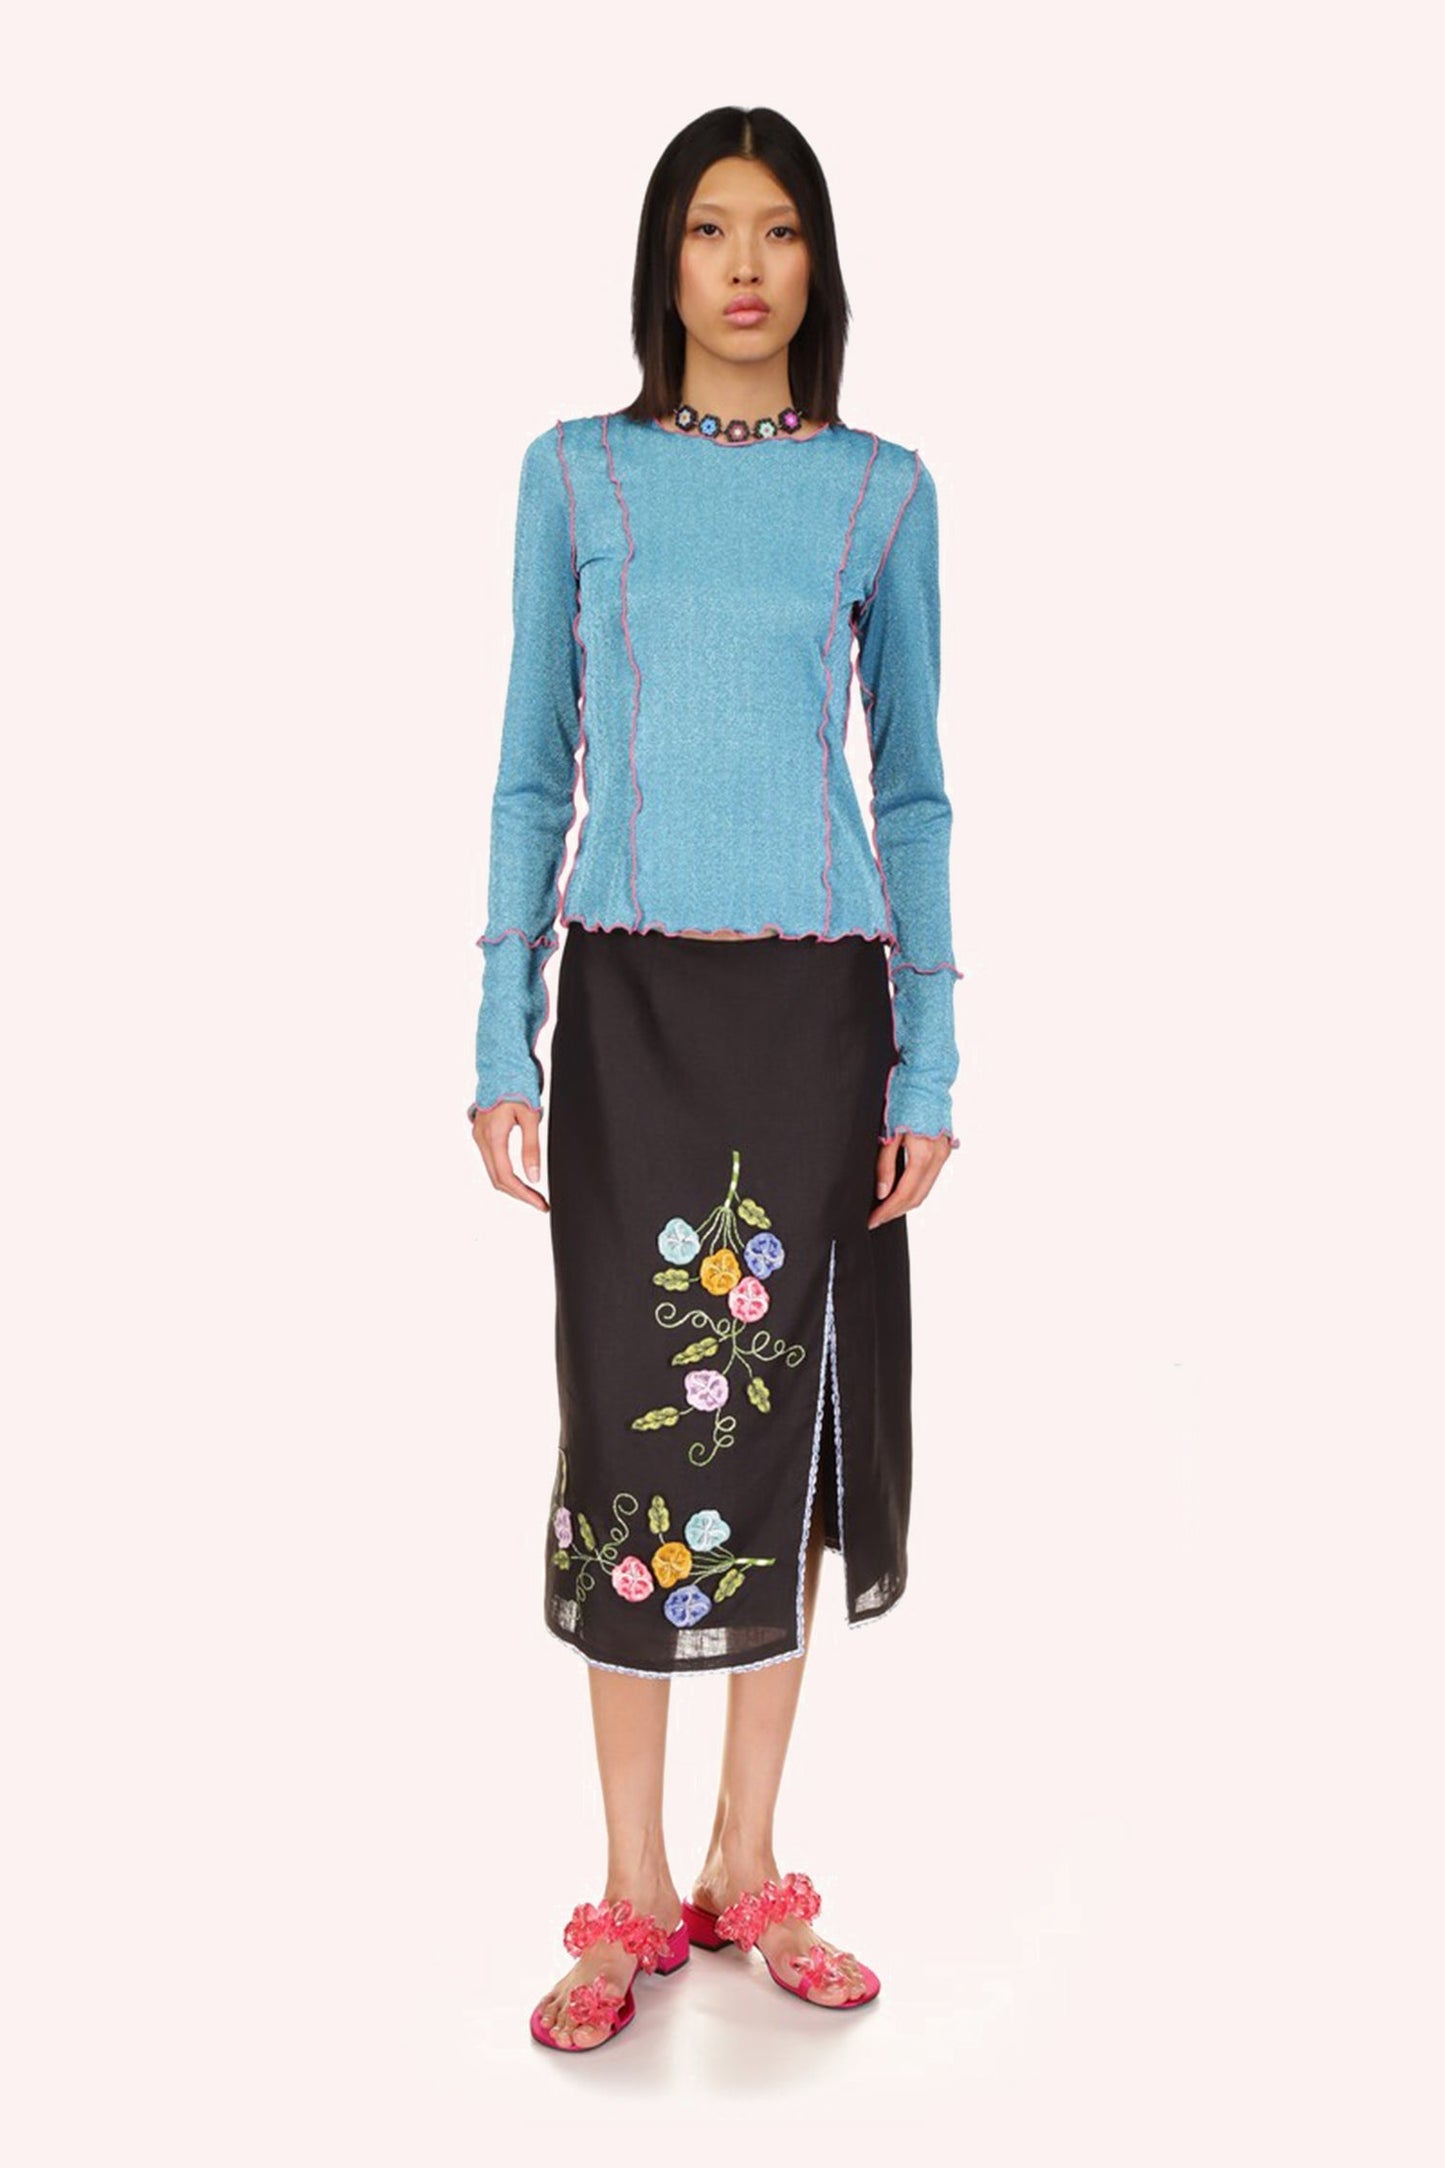 3-D Pansy Embroidered on Linen Skirt black Skirt with blue hems and the left side slit